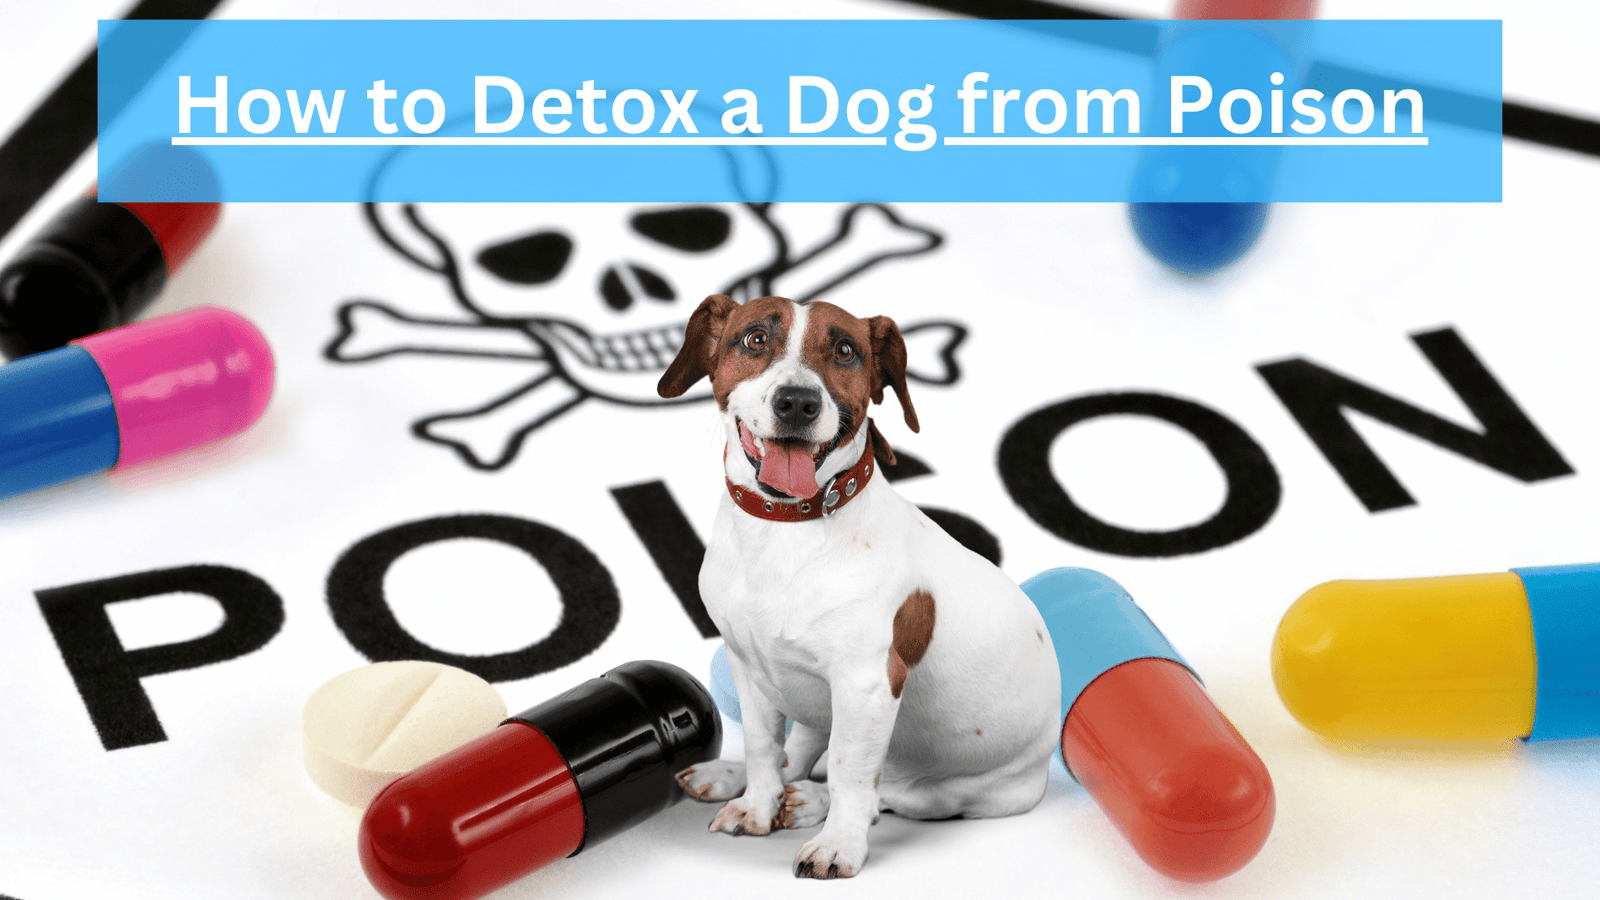 How to Detox a Dog from Poison